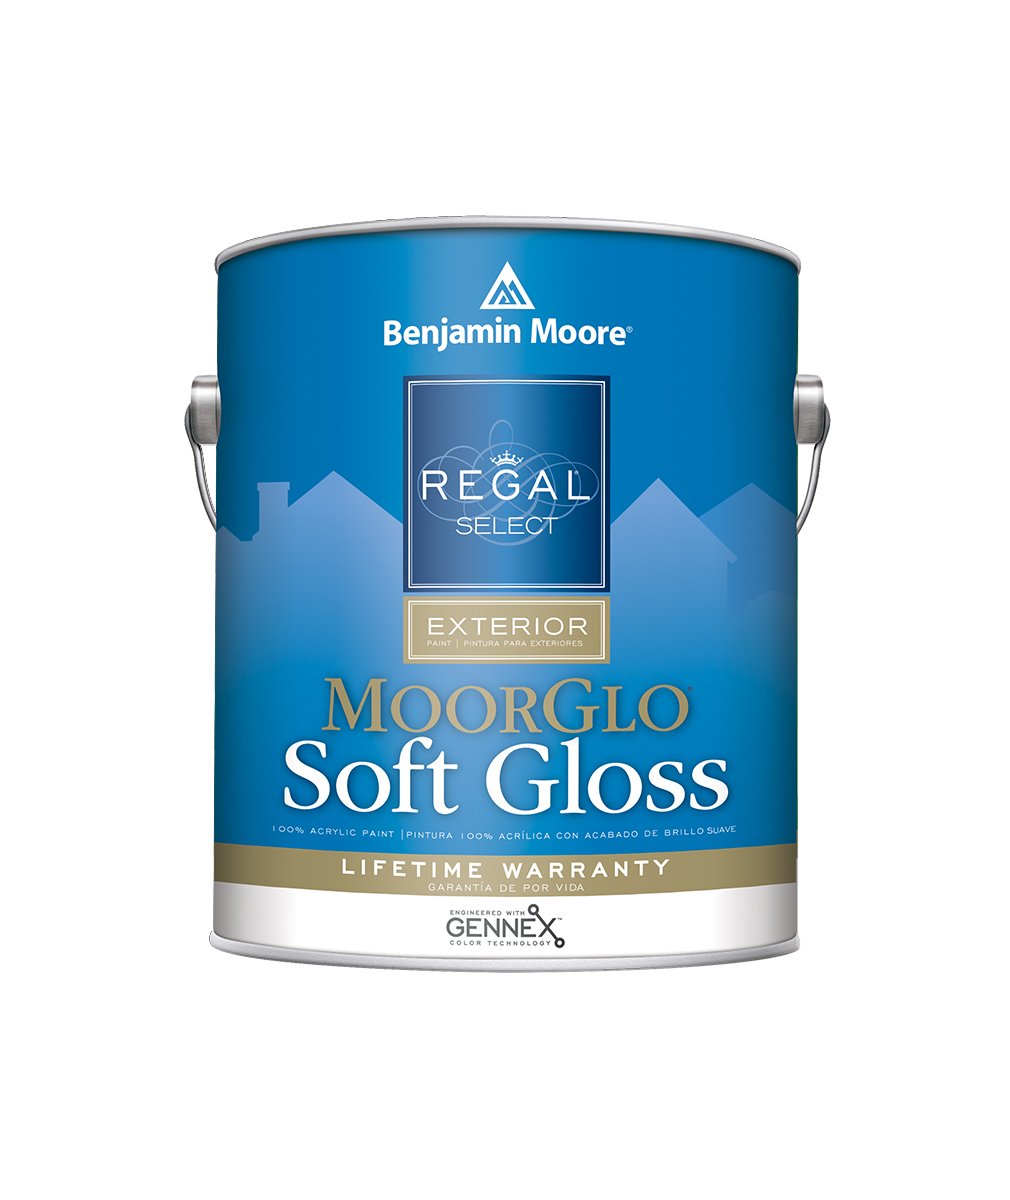 Benjamin Moore Regal Select Soft Gloss Exterior Paint available at JC Licht